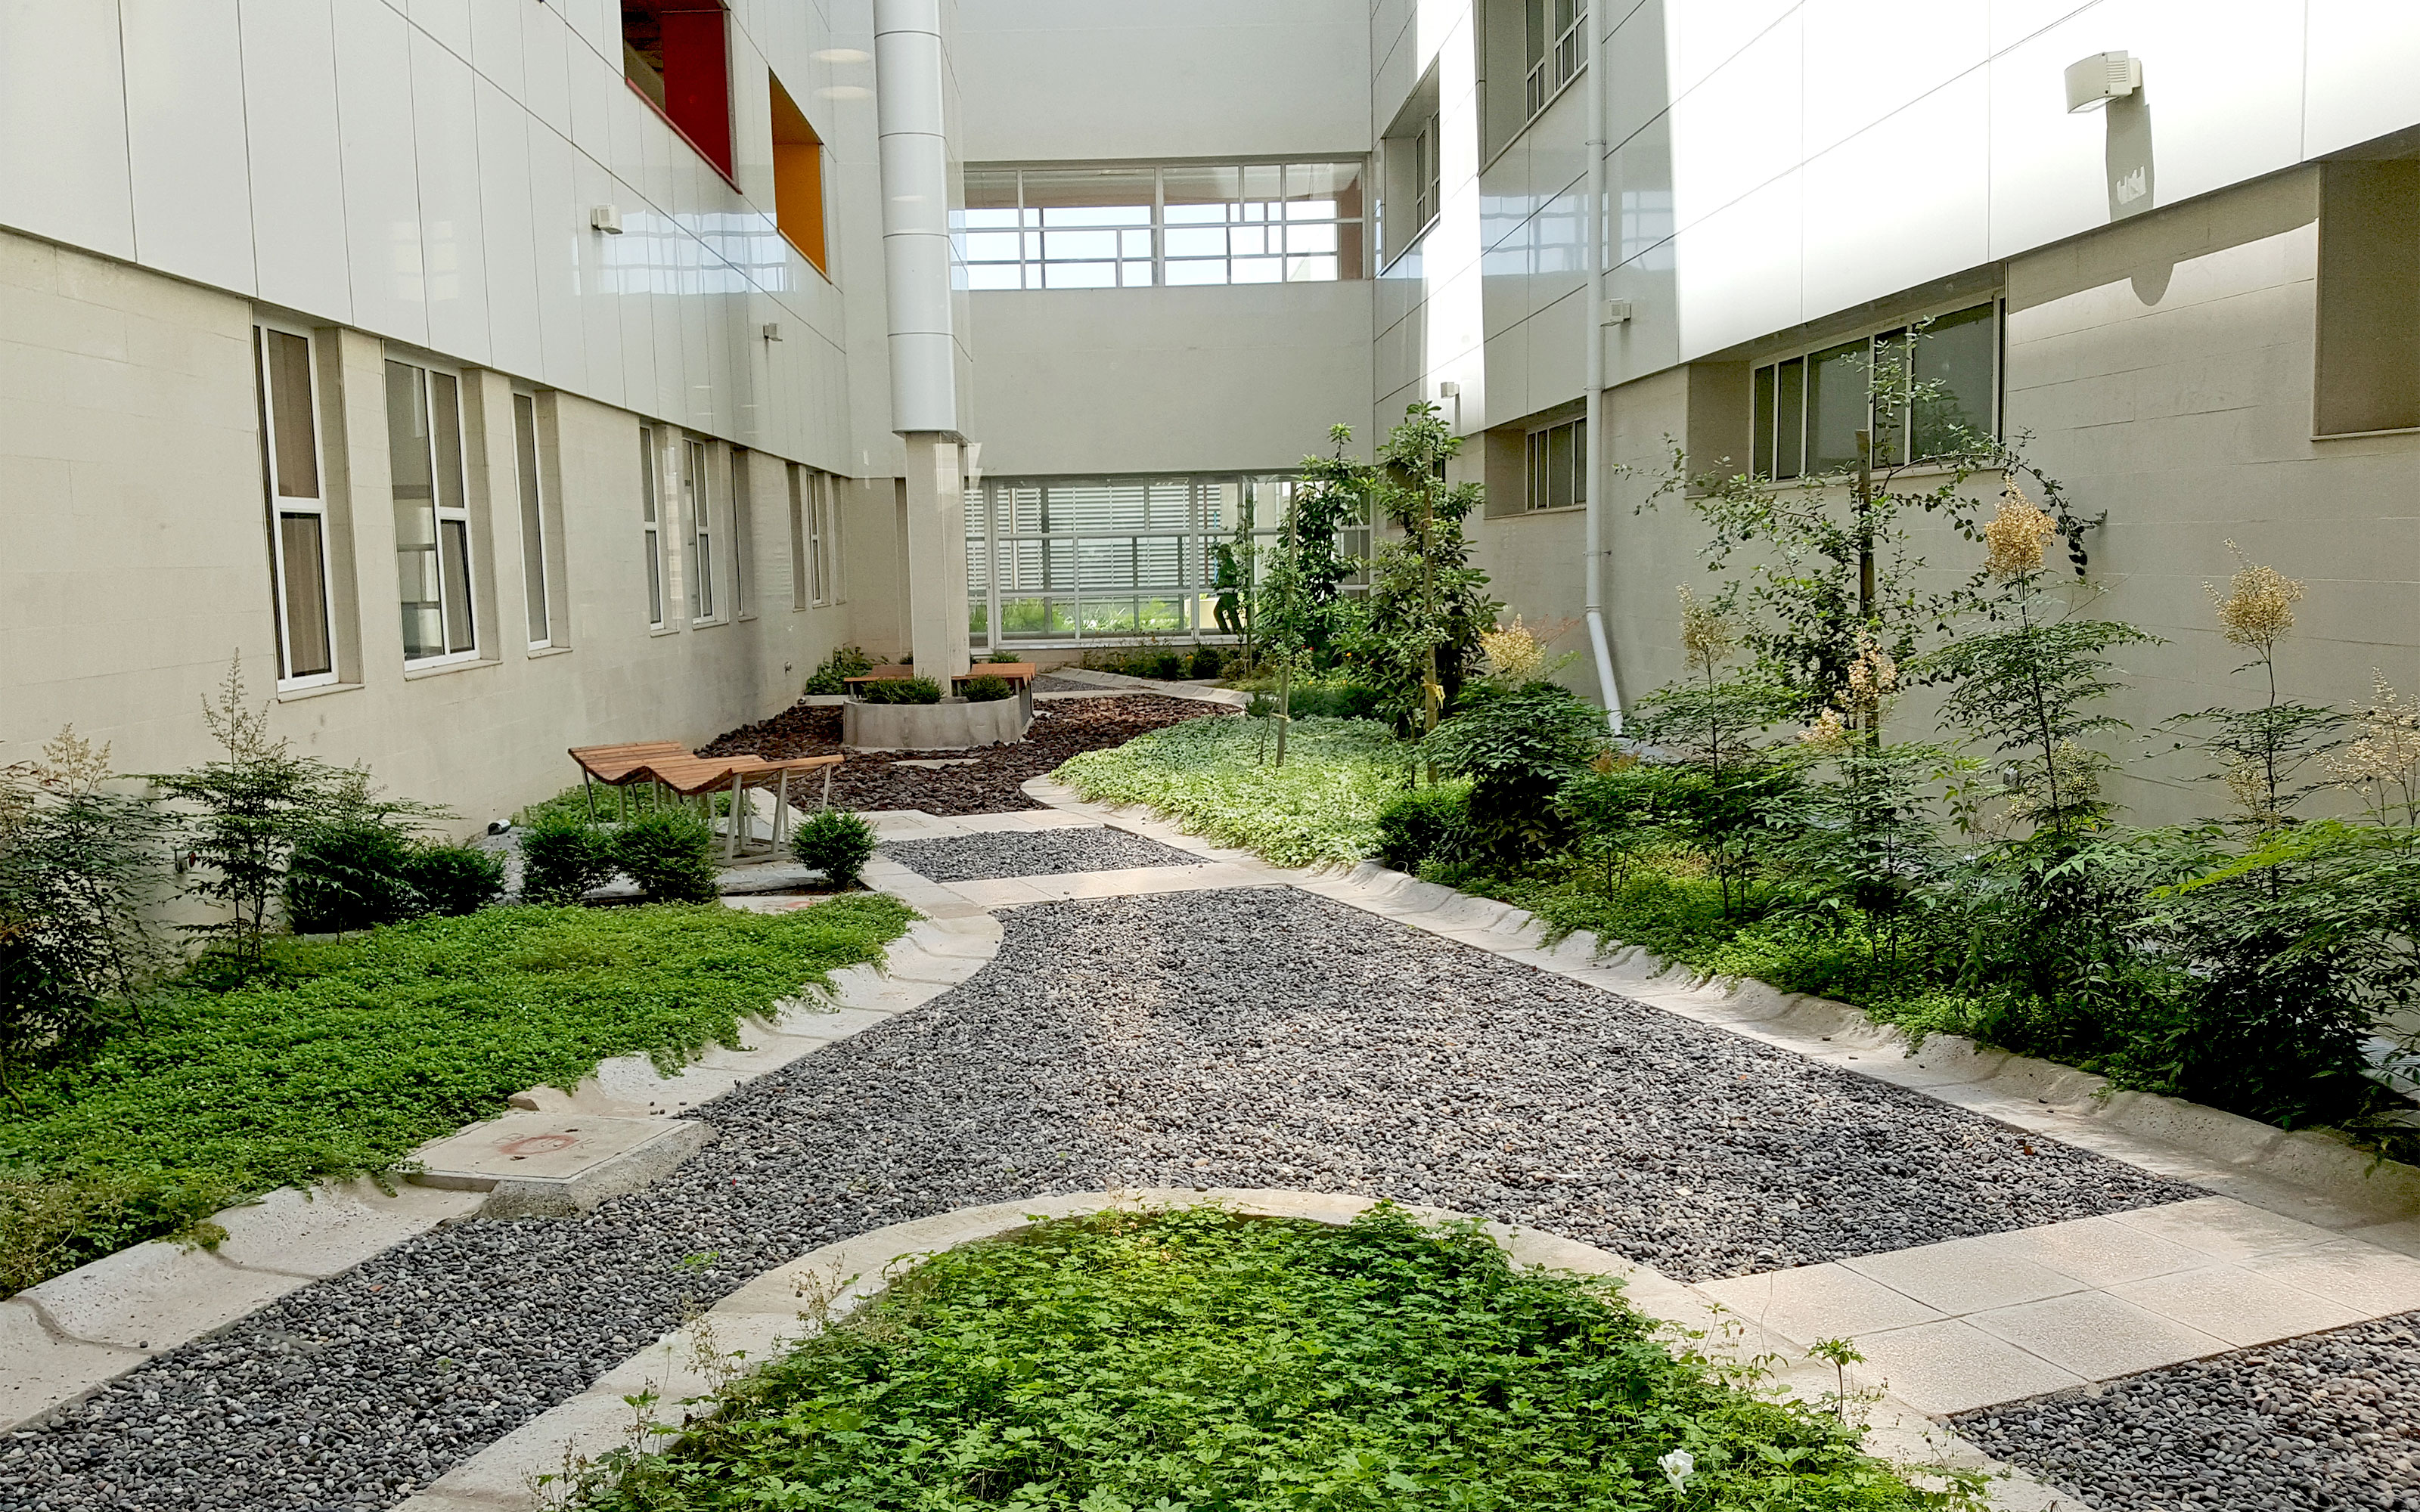 Greened courtyard with benches